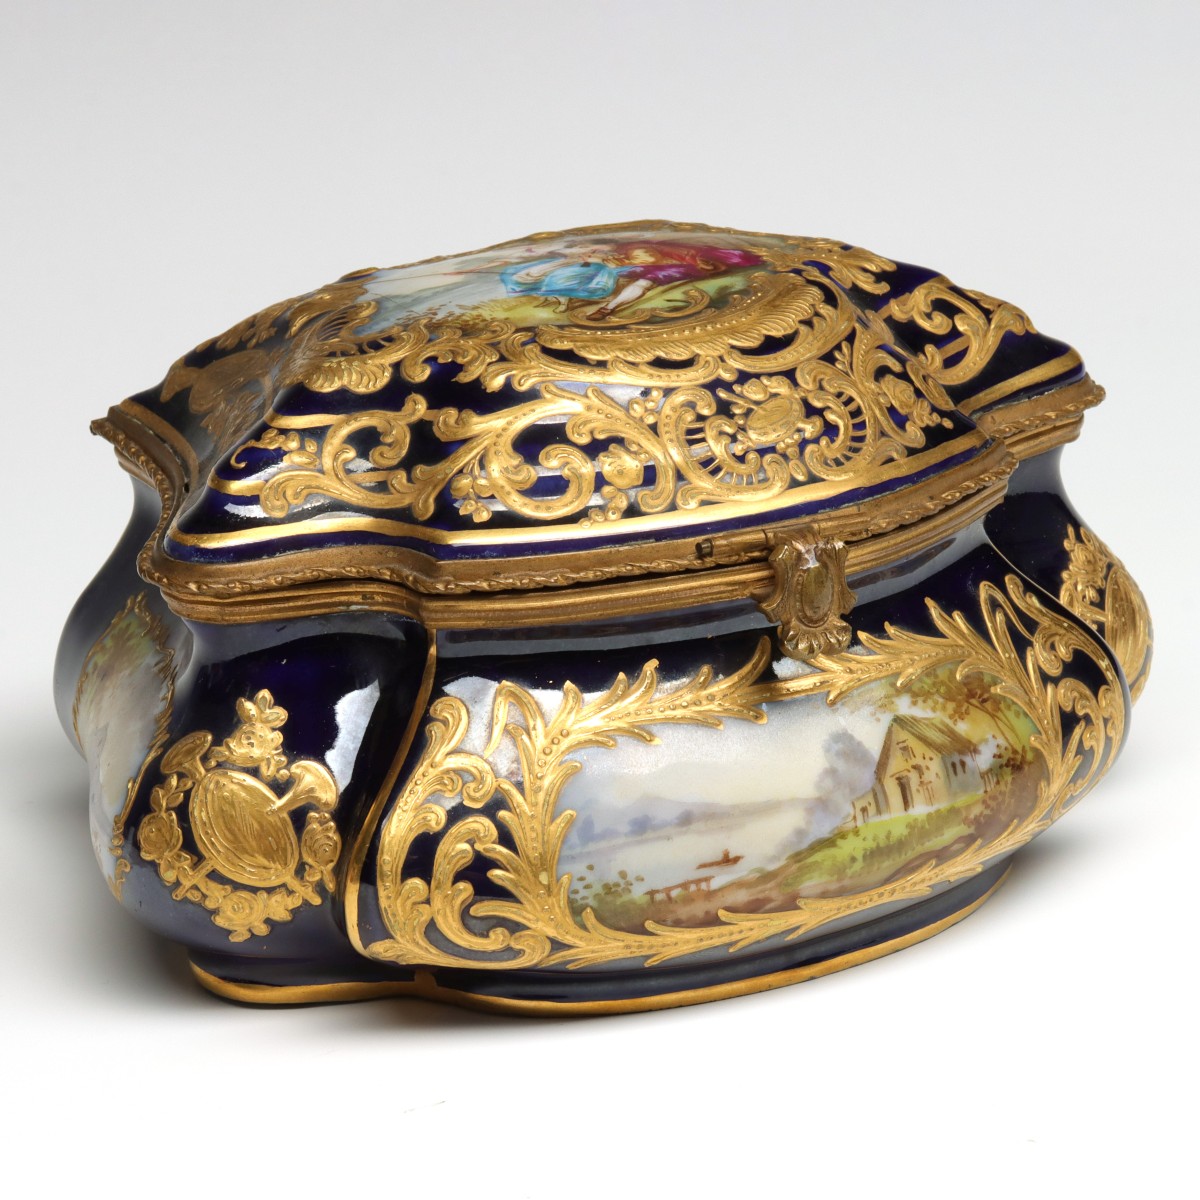 A 19TH C. SEVRES PORCELAIN BOX WITH RARE PAINTED MARKS